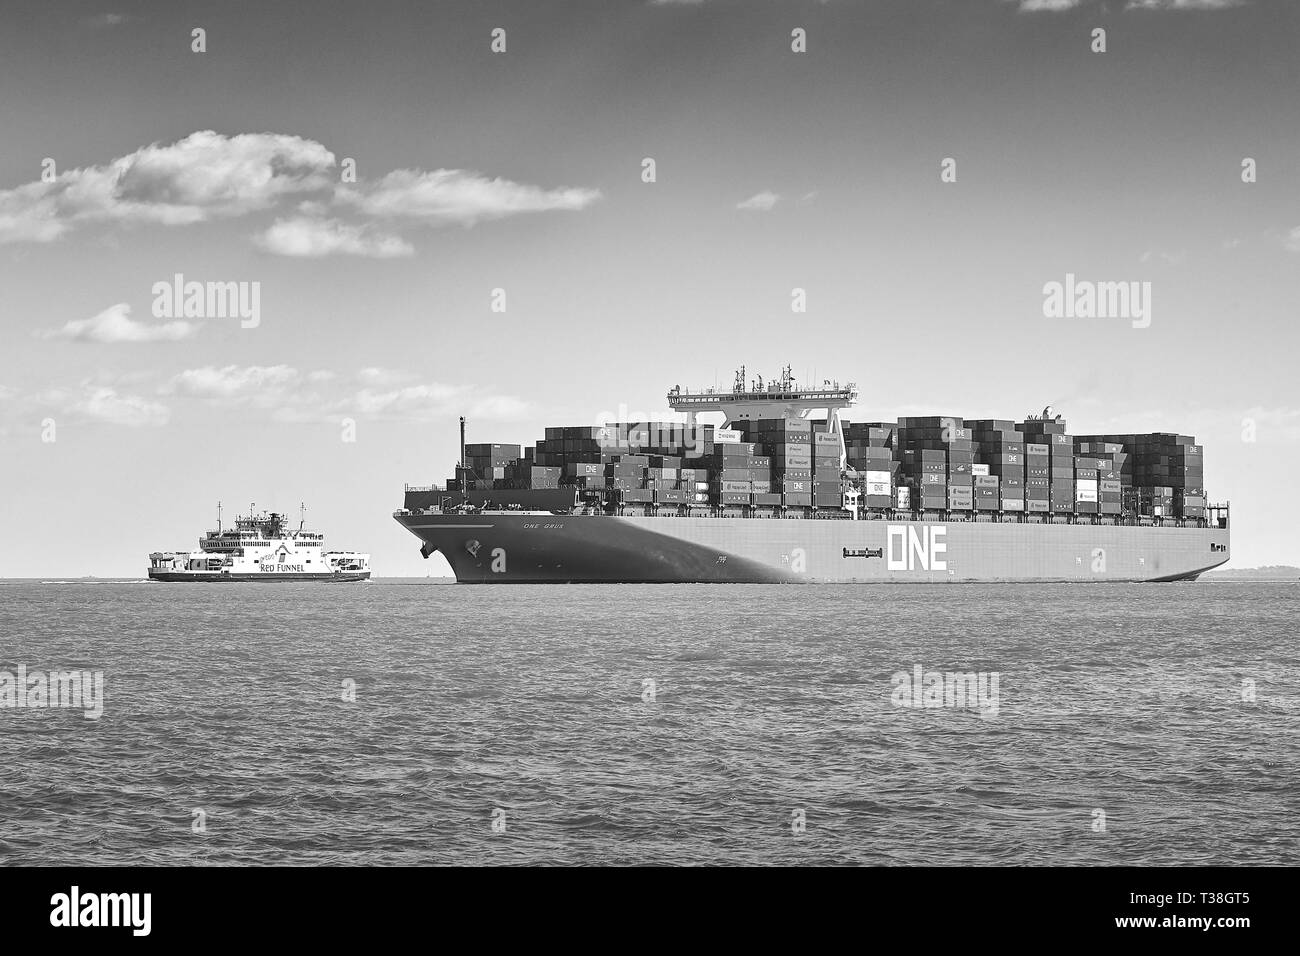 Black and White Photo Of The Ocean Network Express Container Ship, ONE GRUS, Passing A Red Funnel Ferry As It Approaches The Port Of Southampton, UK. Stock Photo